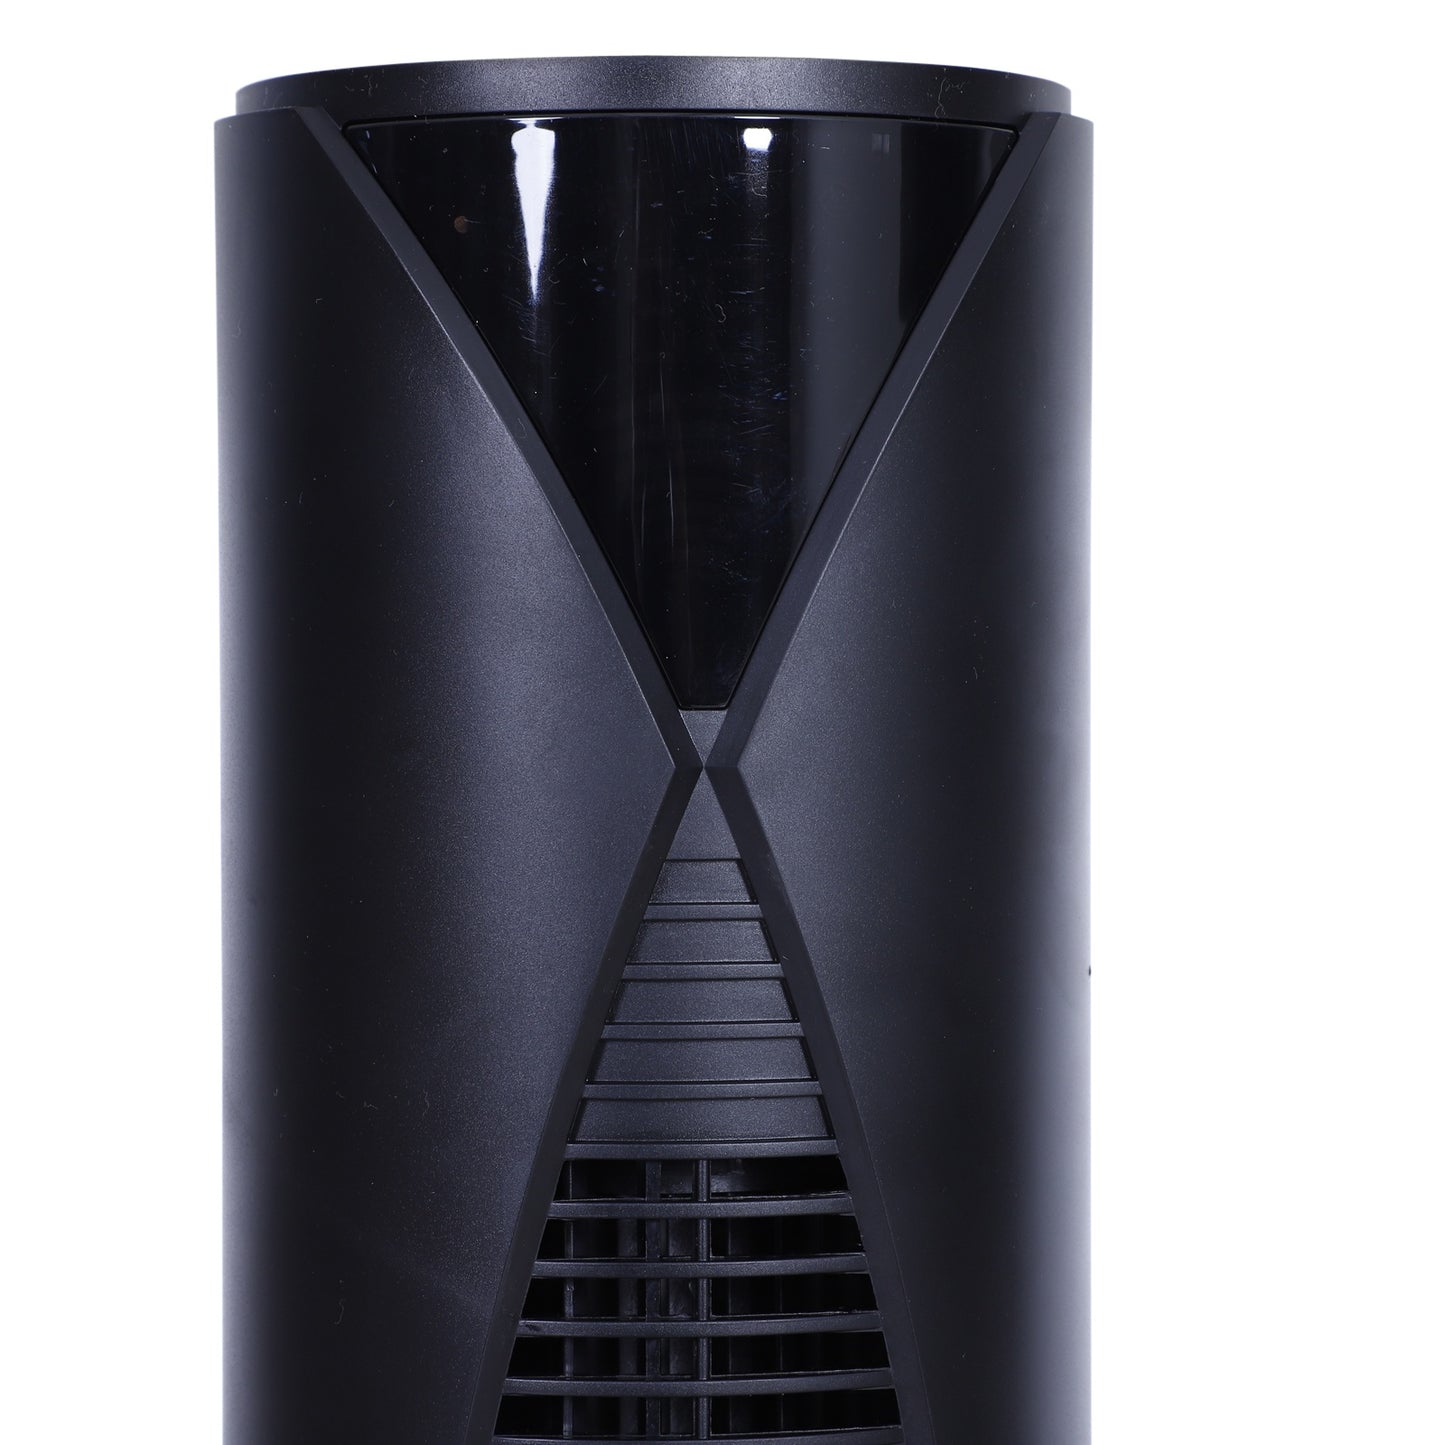 HOMCOM ABS Oscillating 3-Speed Settings Tower Fan w/ Remote Control Black